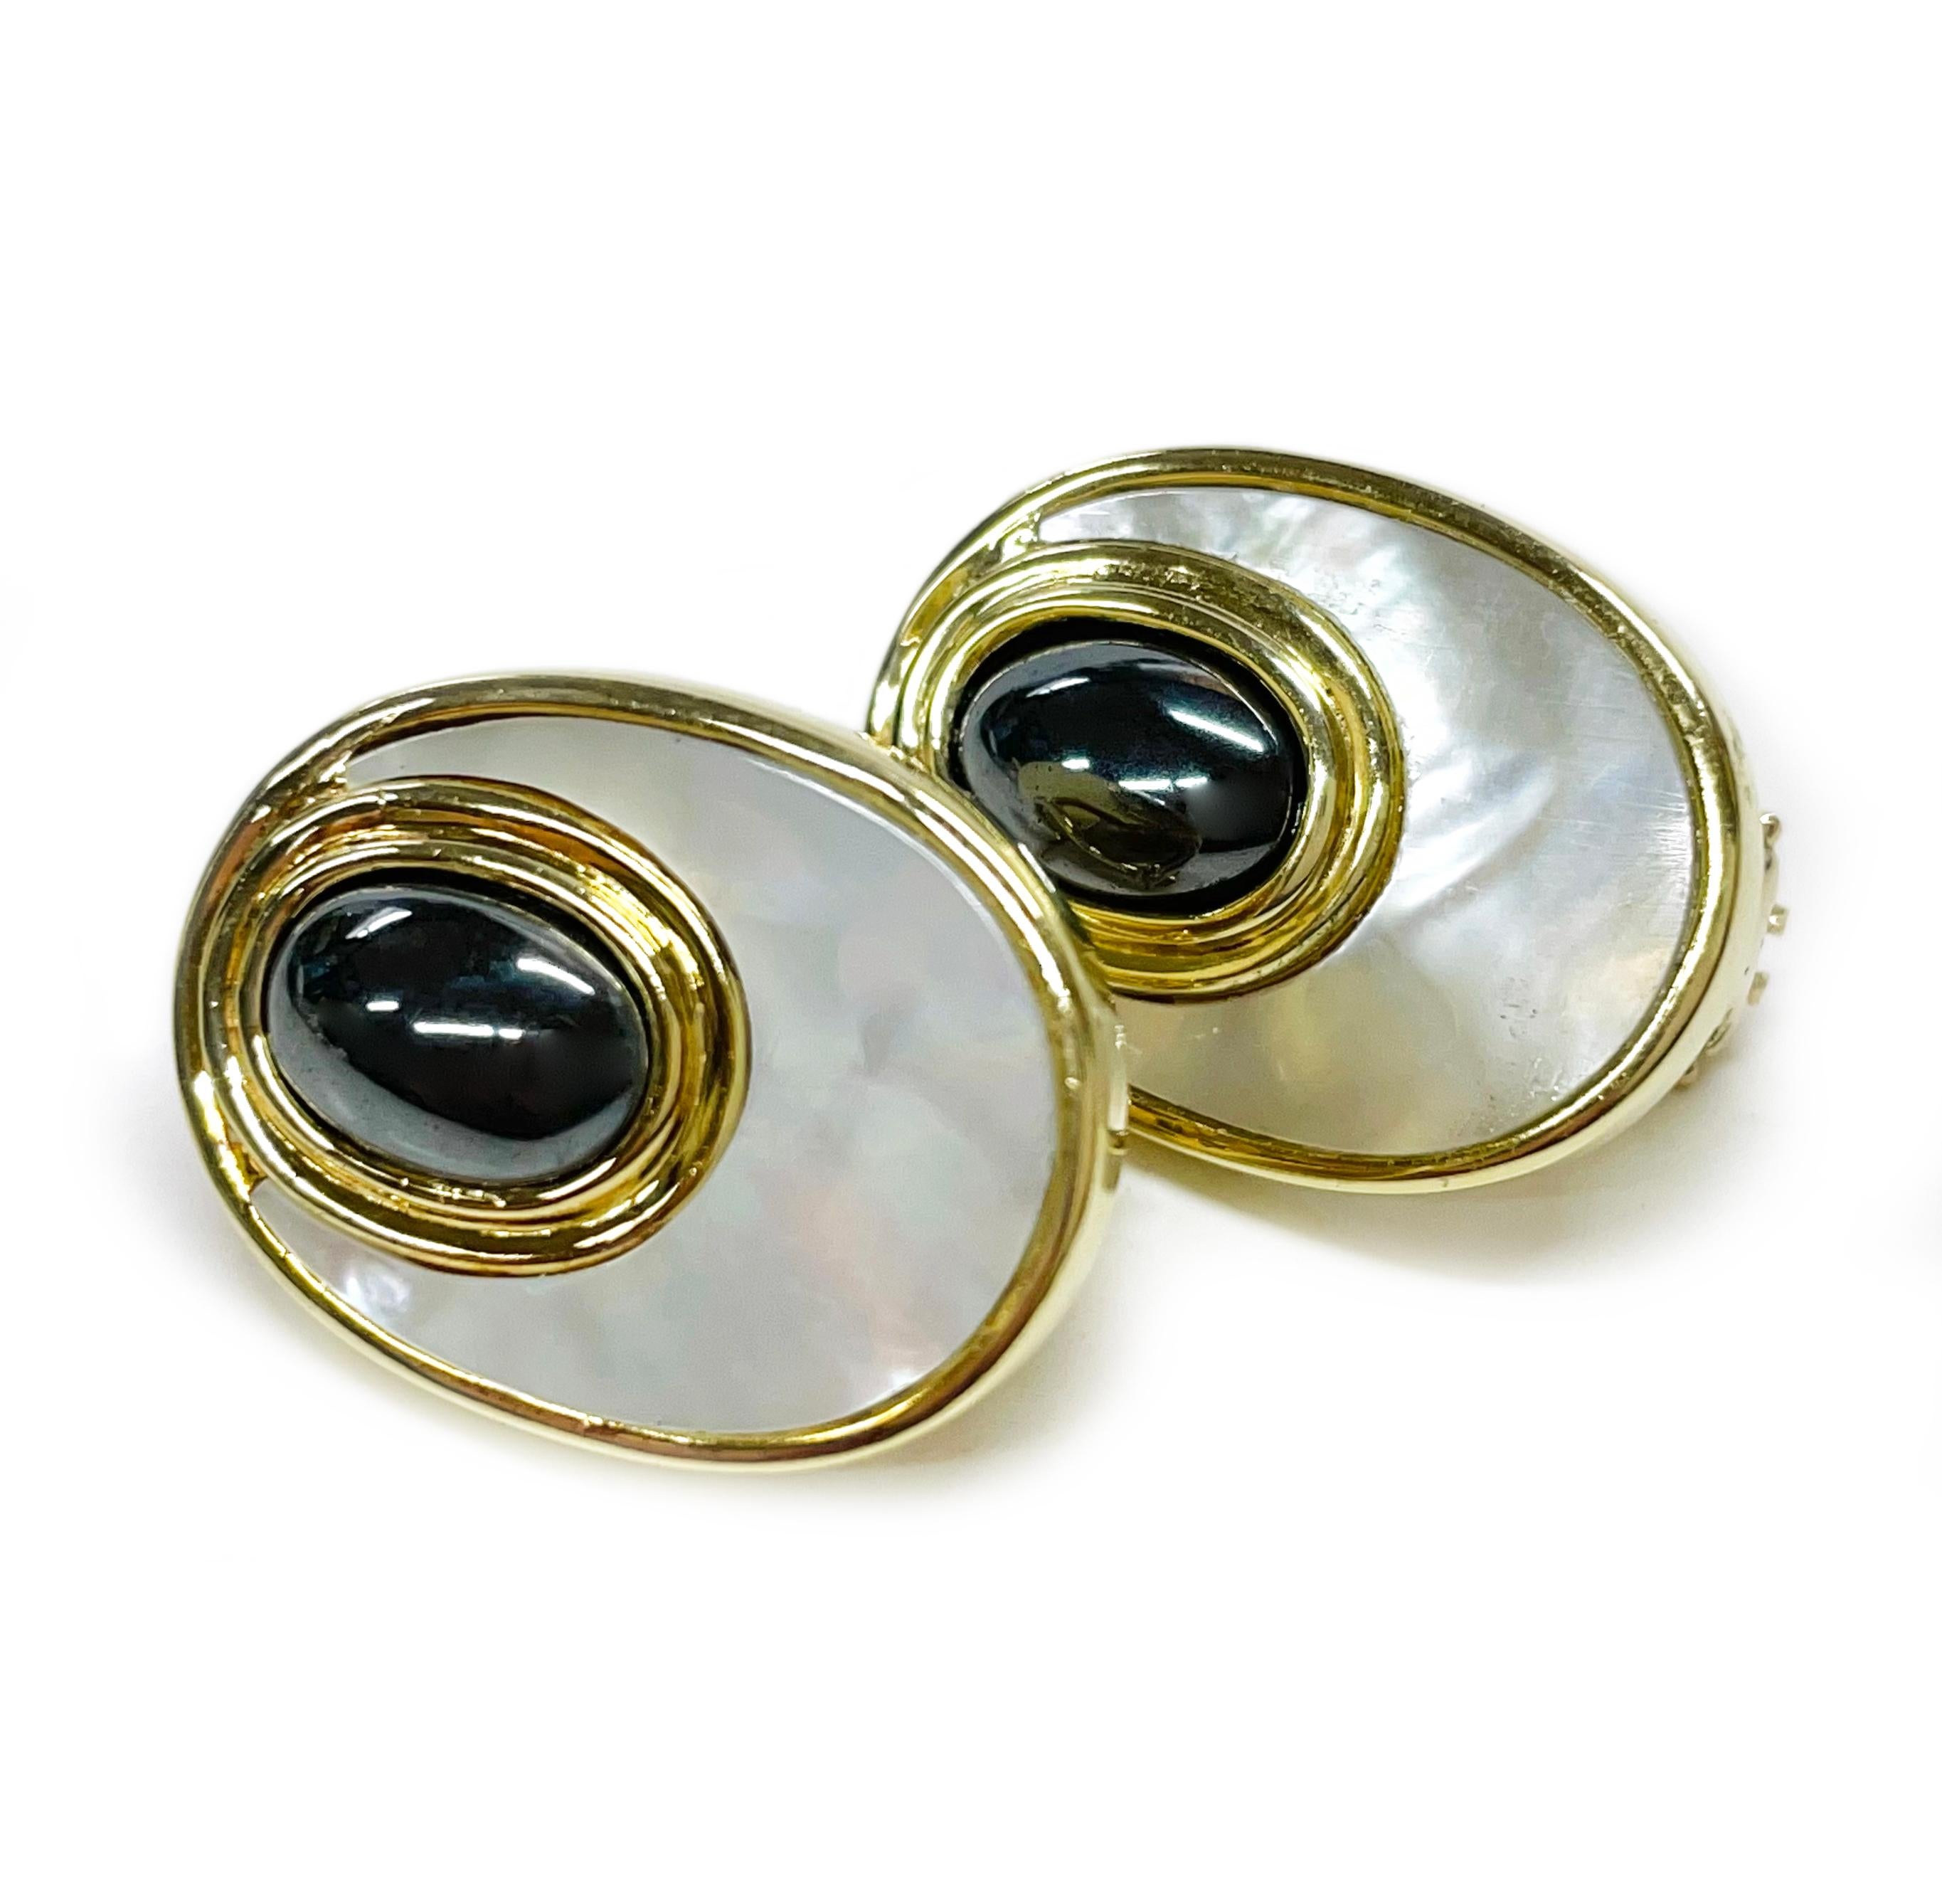 14 Karat Mother of Pearl Hematite Earrings. The earrings feature a double bezel, the larger bezel has flat mother of pearl while the smaller oval bezel has a 9 x 6mm hematite cabochon. The earrings have a post and Omega clip back. Each earring